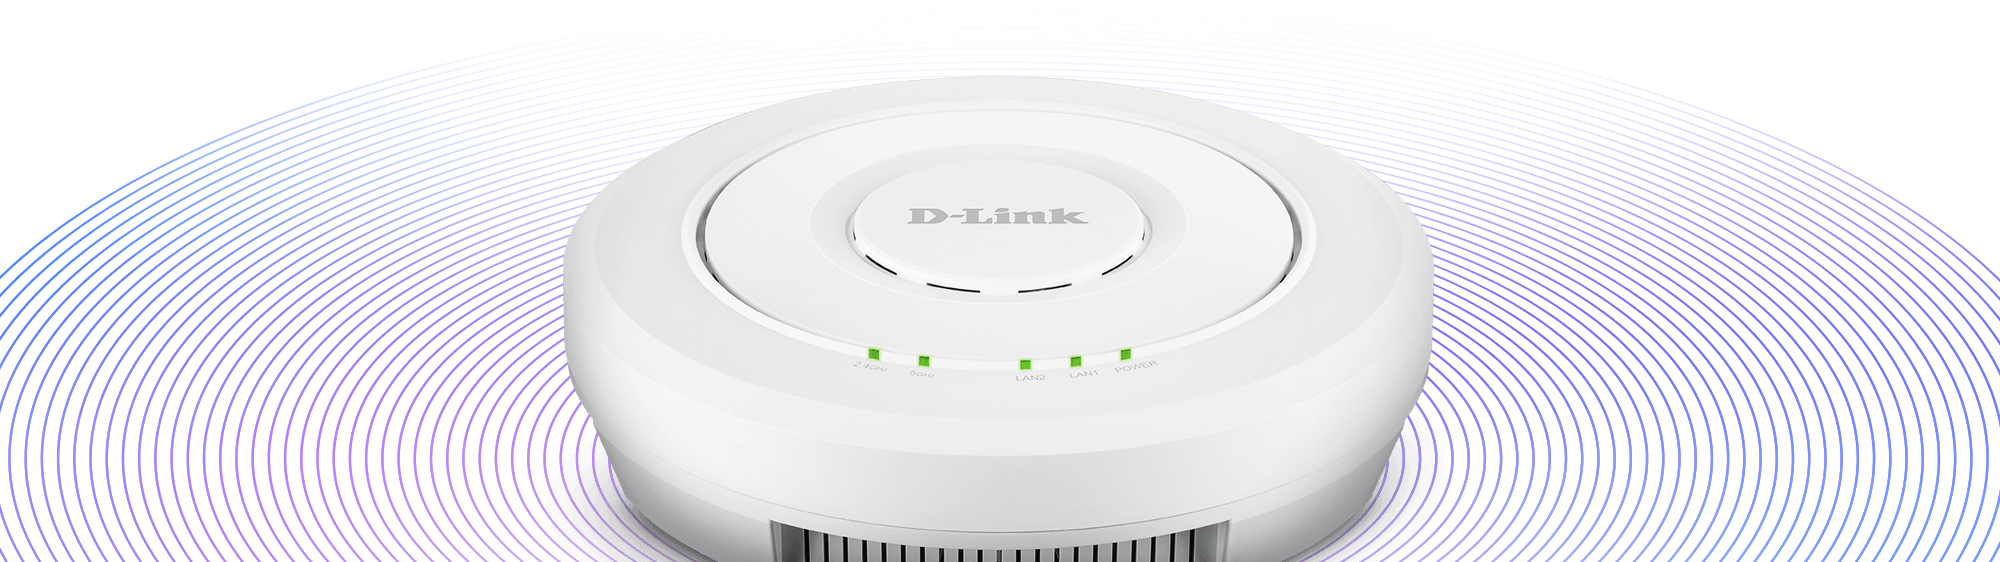 Wireless waves from the DWL-6620APS Wireless AC1300 Wave 2 Unified Access Point with Smart Antenna